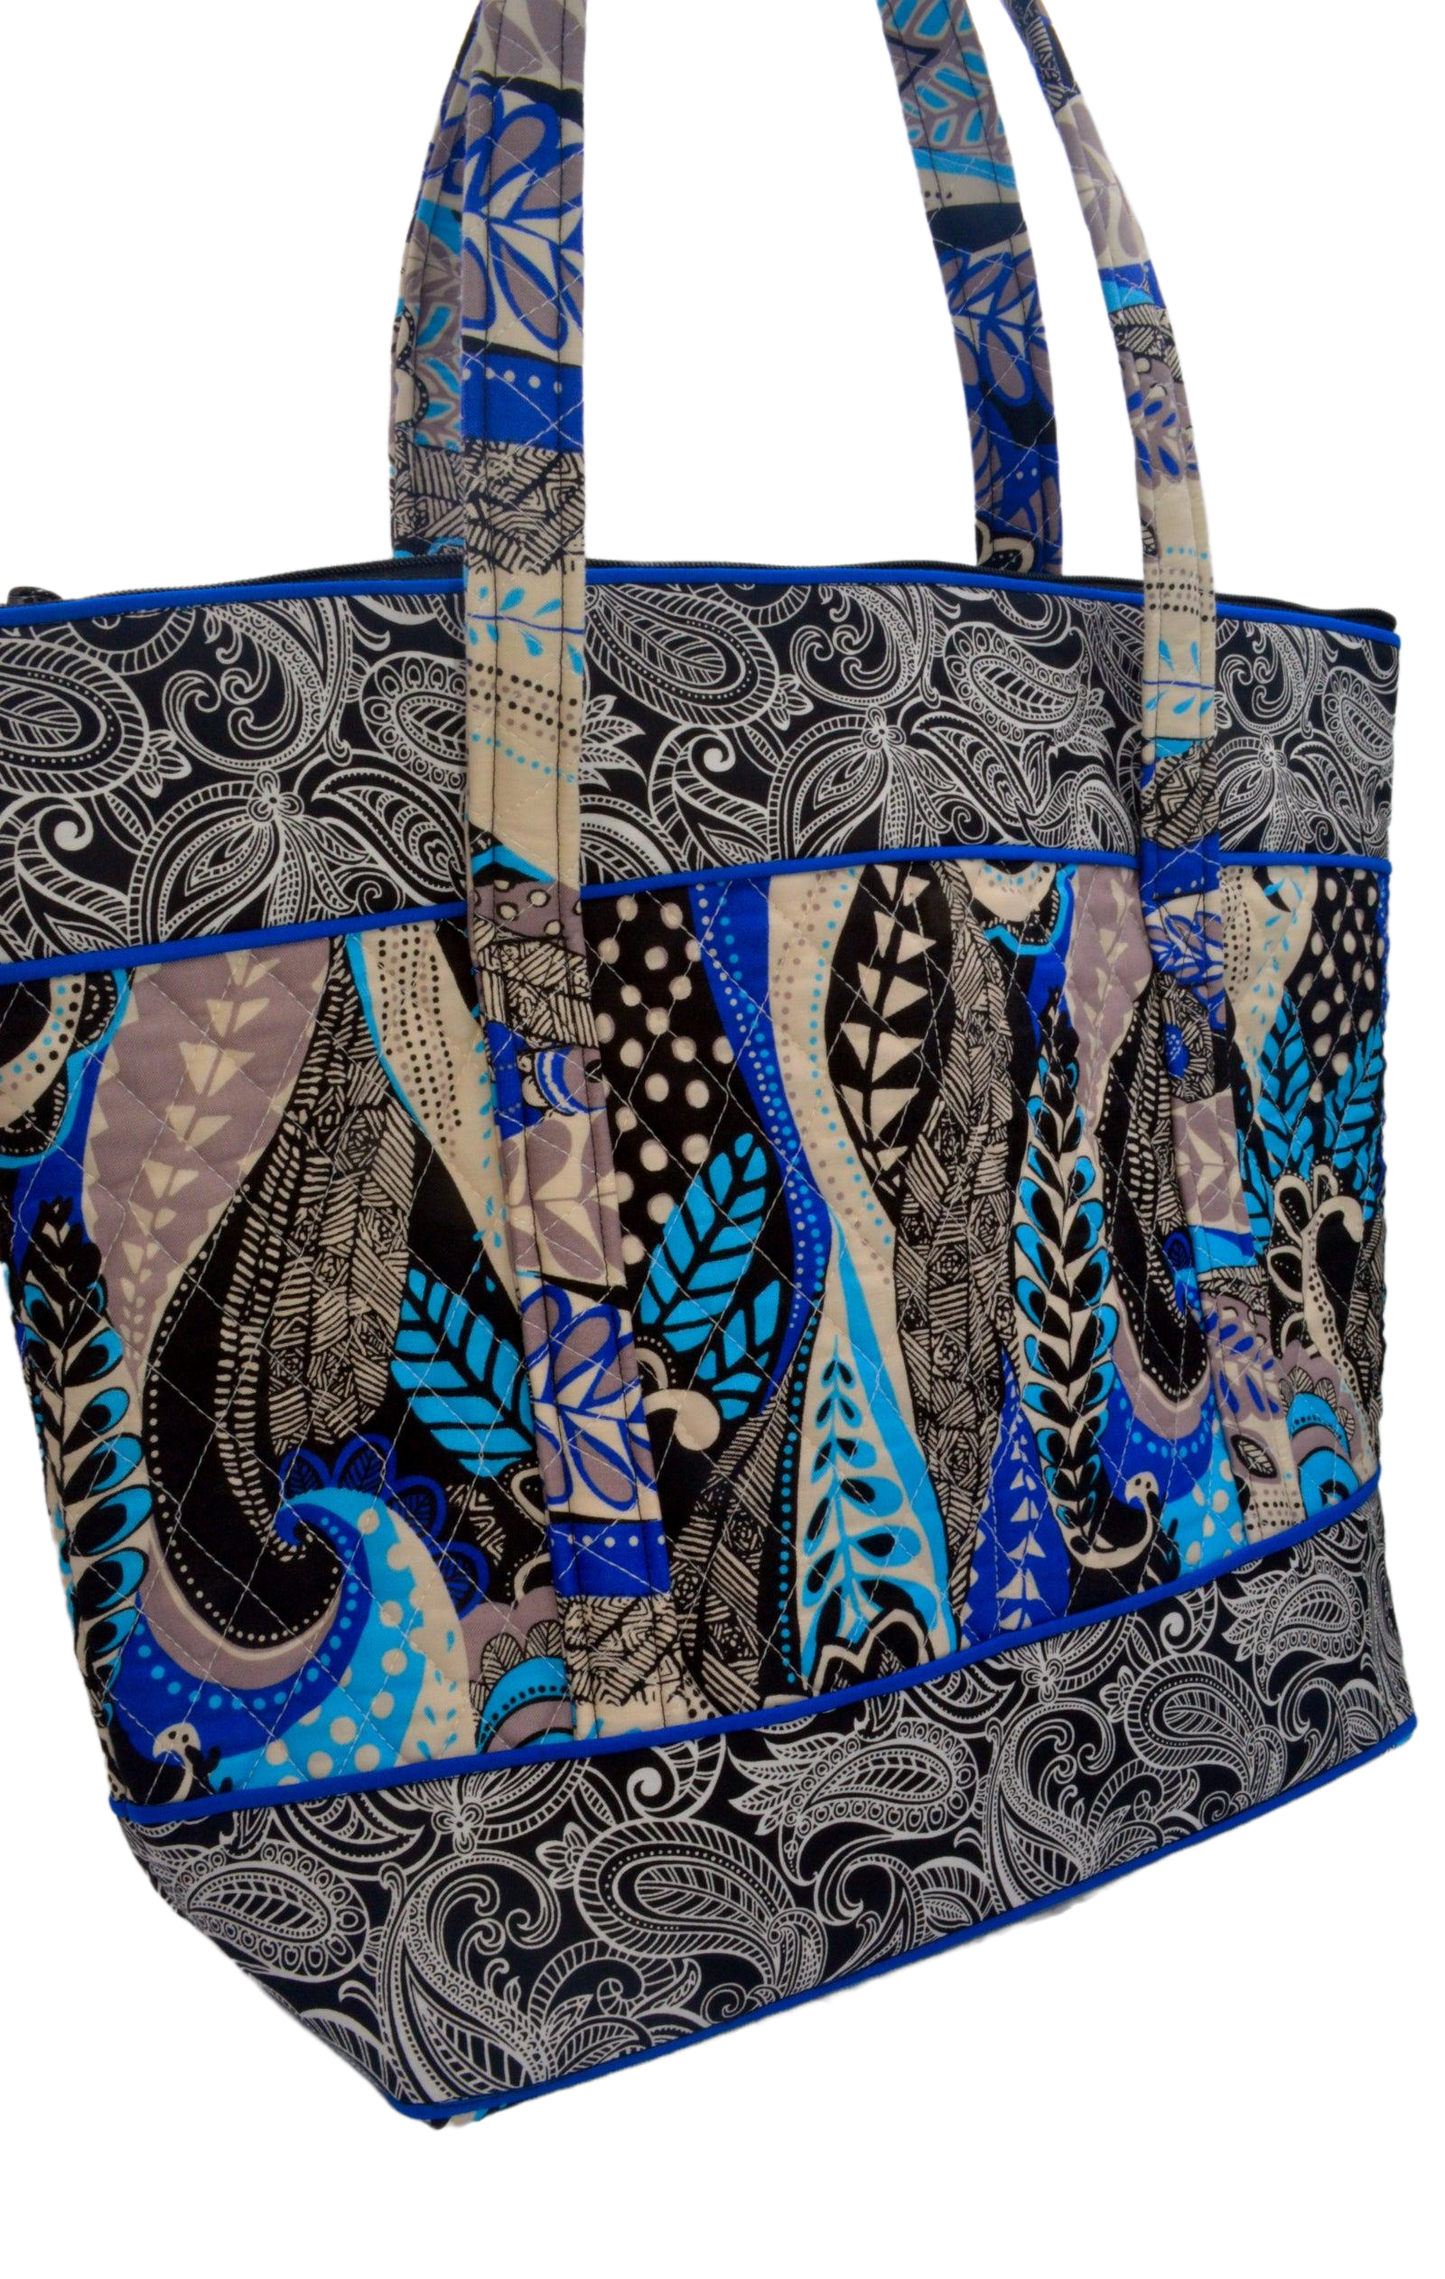 Blue Paisley Large Square Purse with Blue Piping